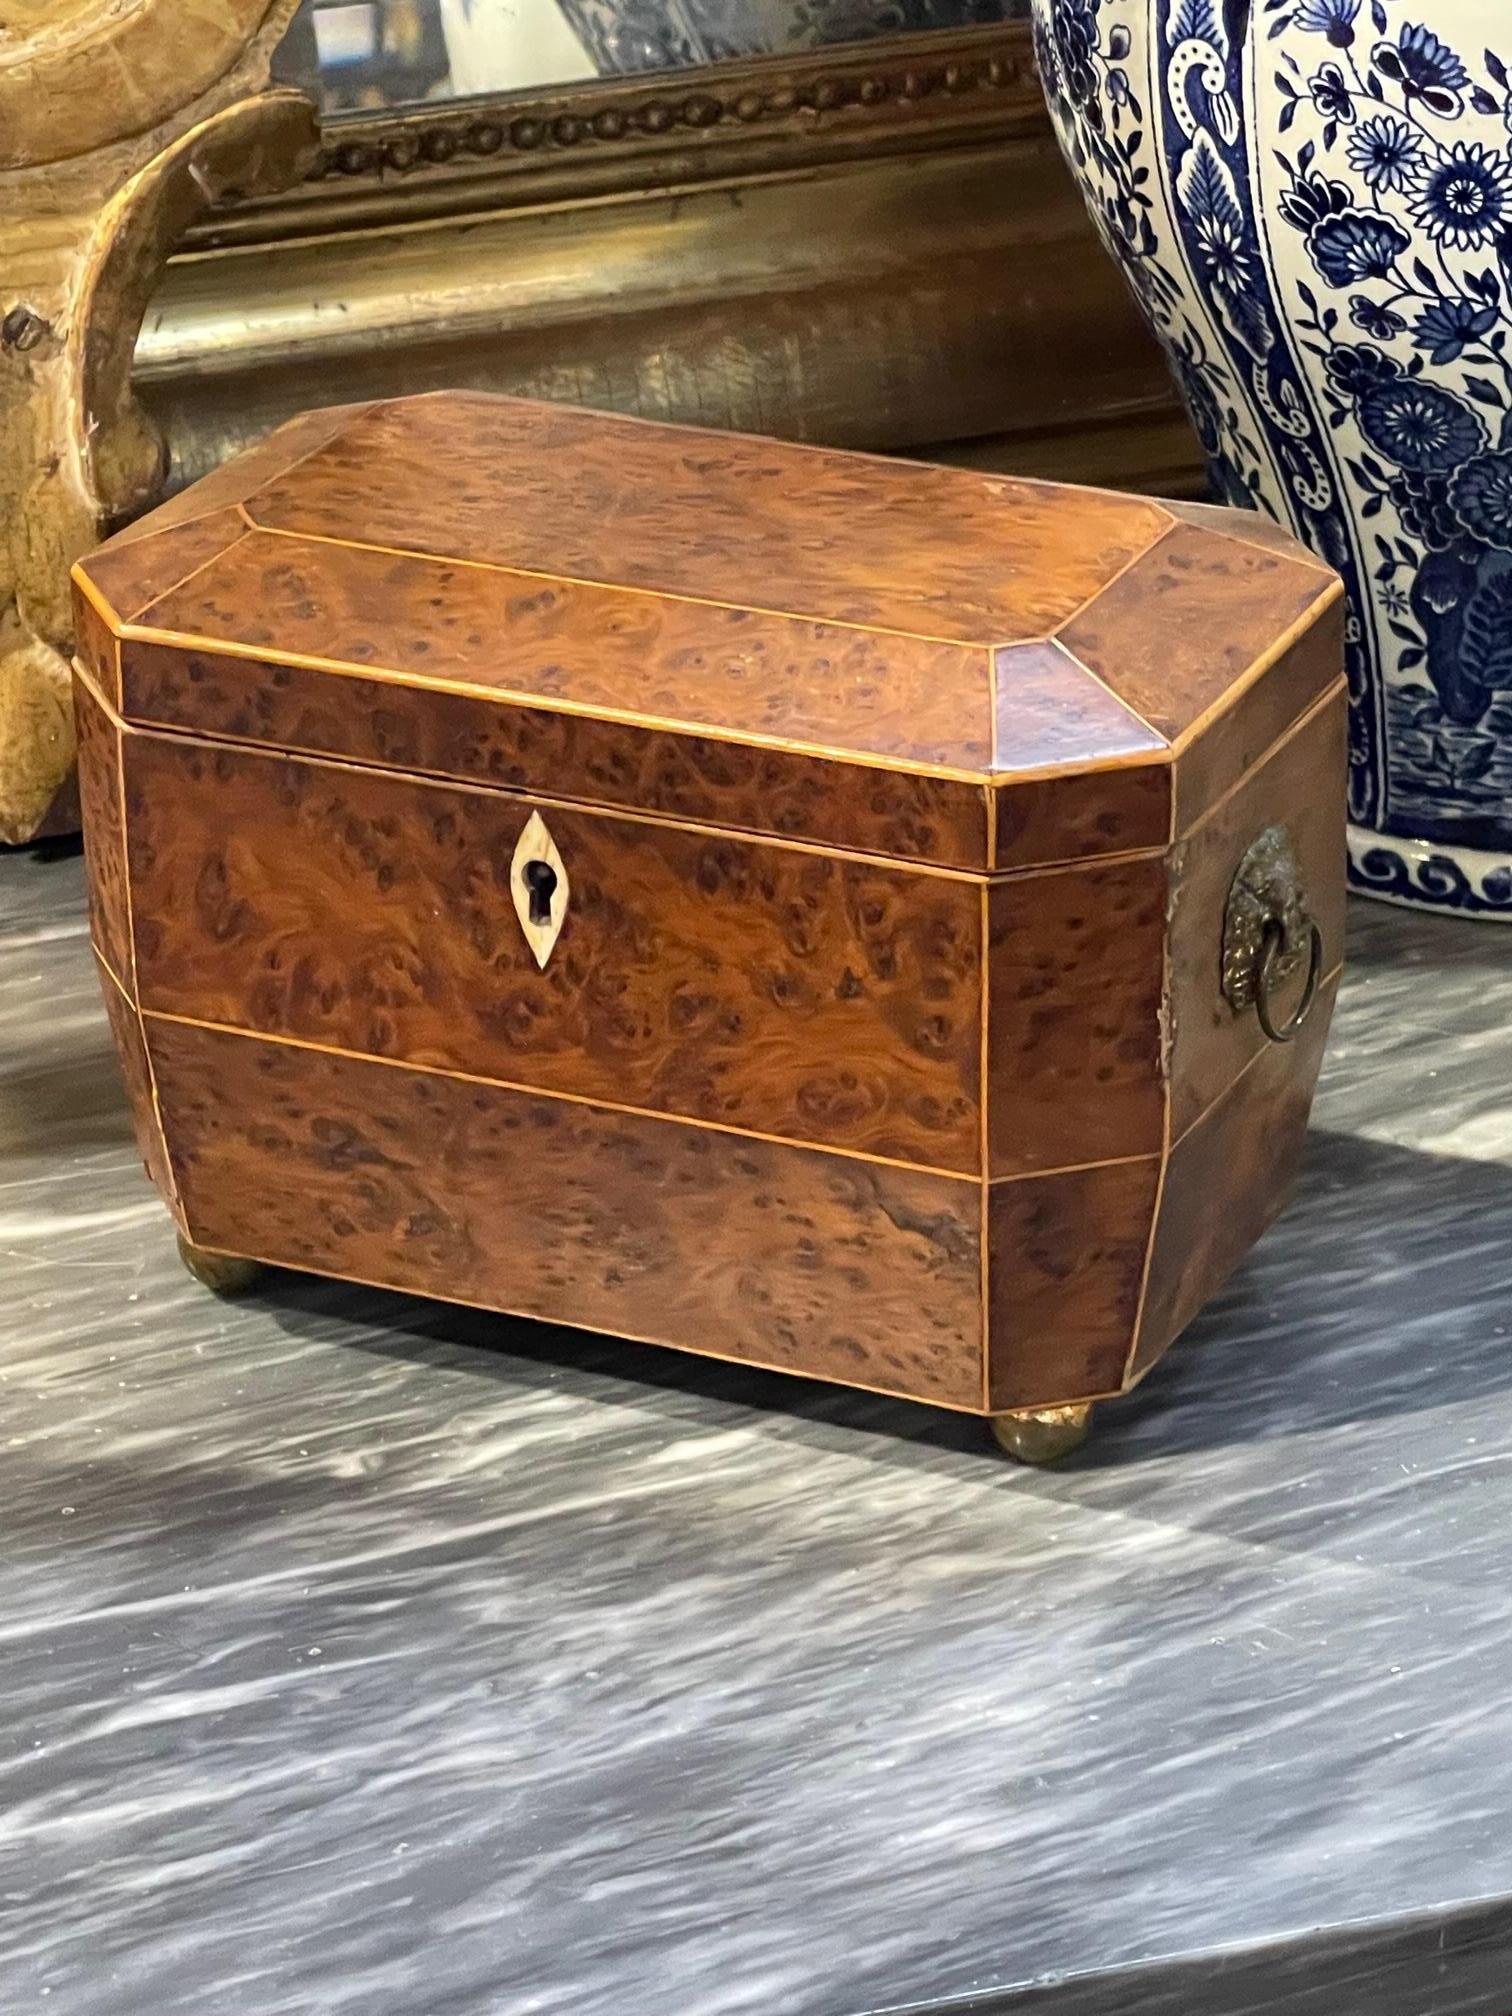 Beautiful 19th century English Regency burl walnut tea caddy. Lovely shape and pretty details including decorative handles on the sides. Makes an elegant statement!